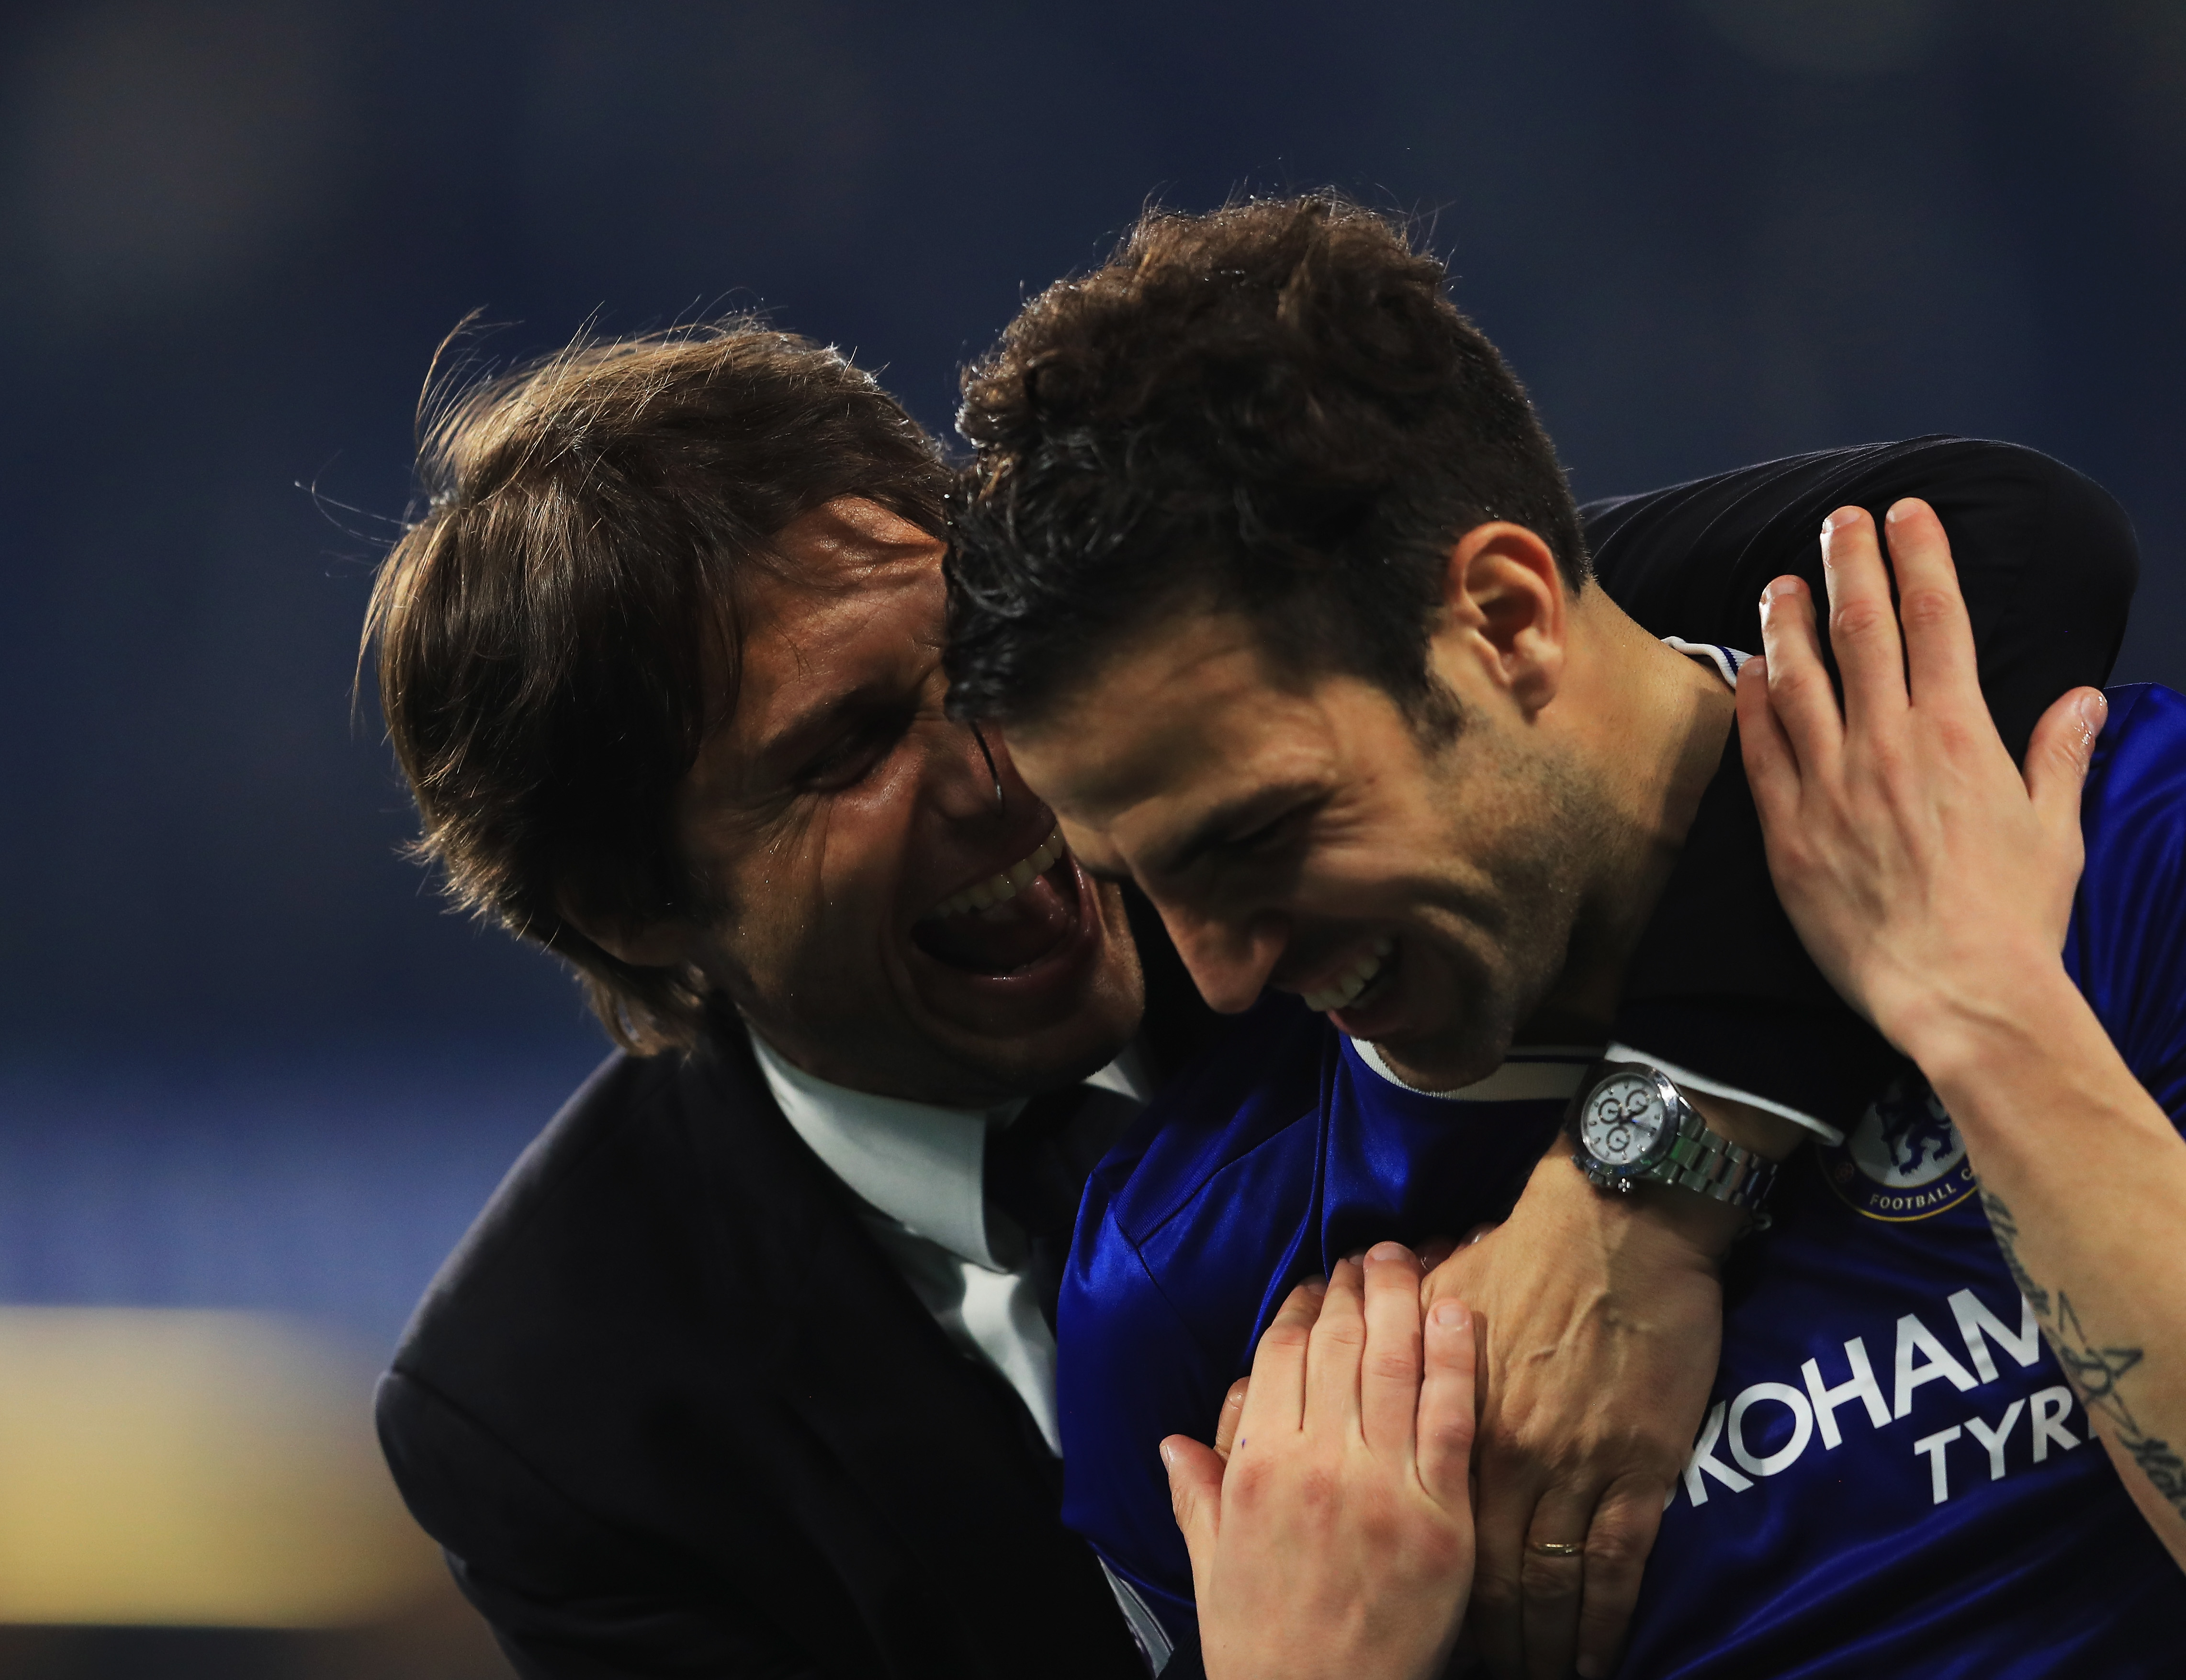 LONDON, ENGLAND - MAY 15: Antonio Conte, Manager of Chelsea speaks to Cesc Fabregas of Chelsea after the Premier League match between Chelsea and Watford at Stamford Bridge on May 15, 2017 in London, England.  (Photo by Richard Heathcote/Getty Images)